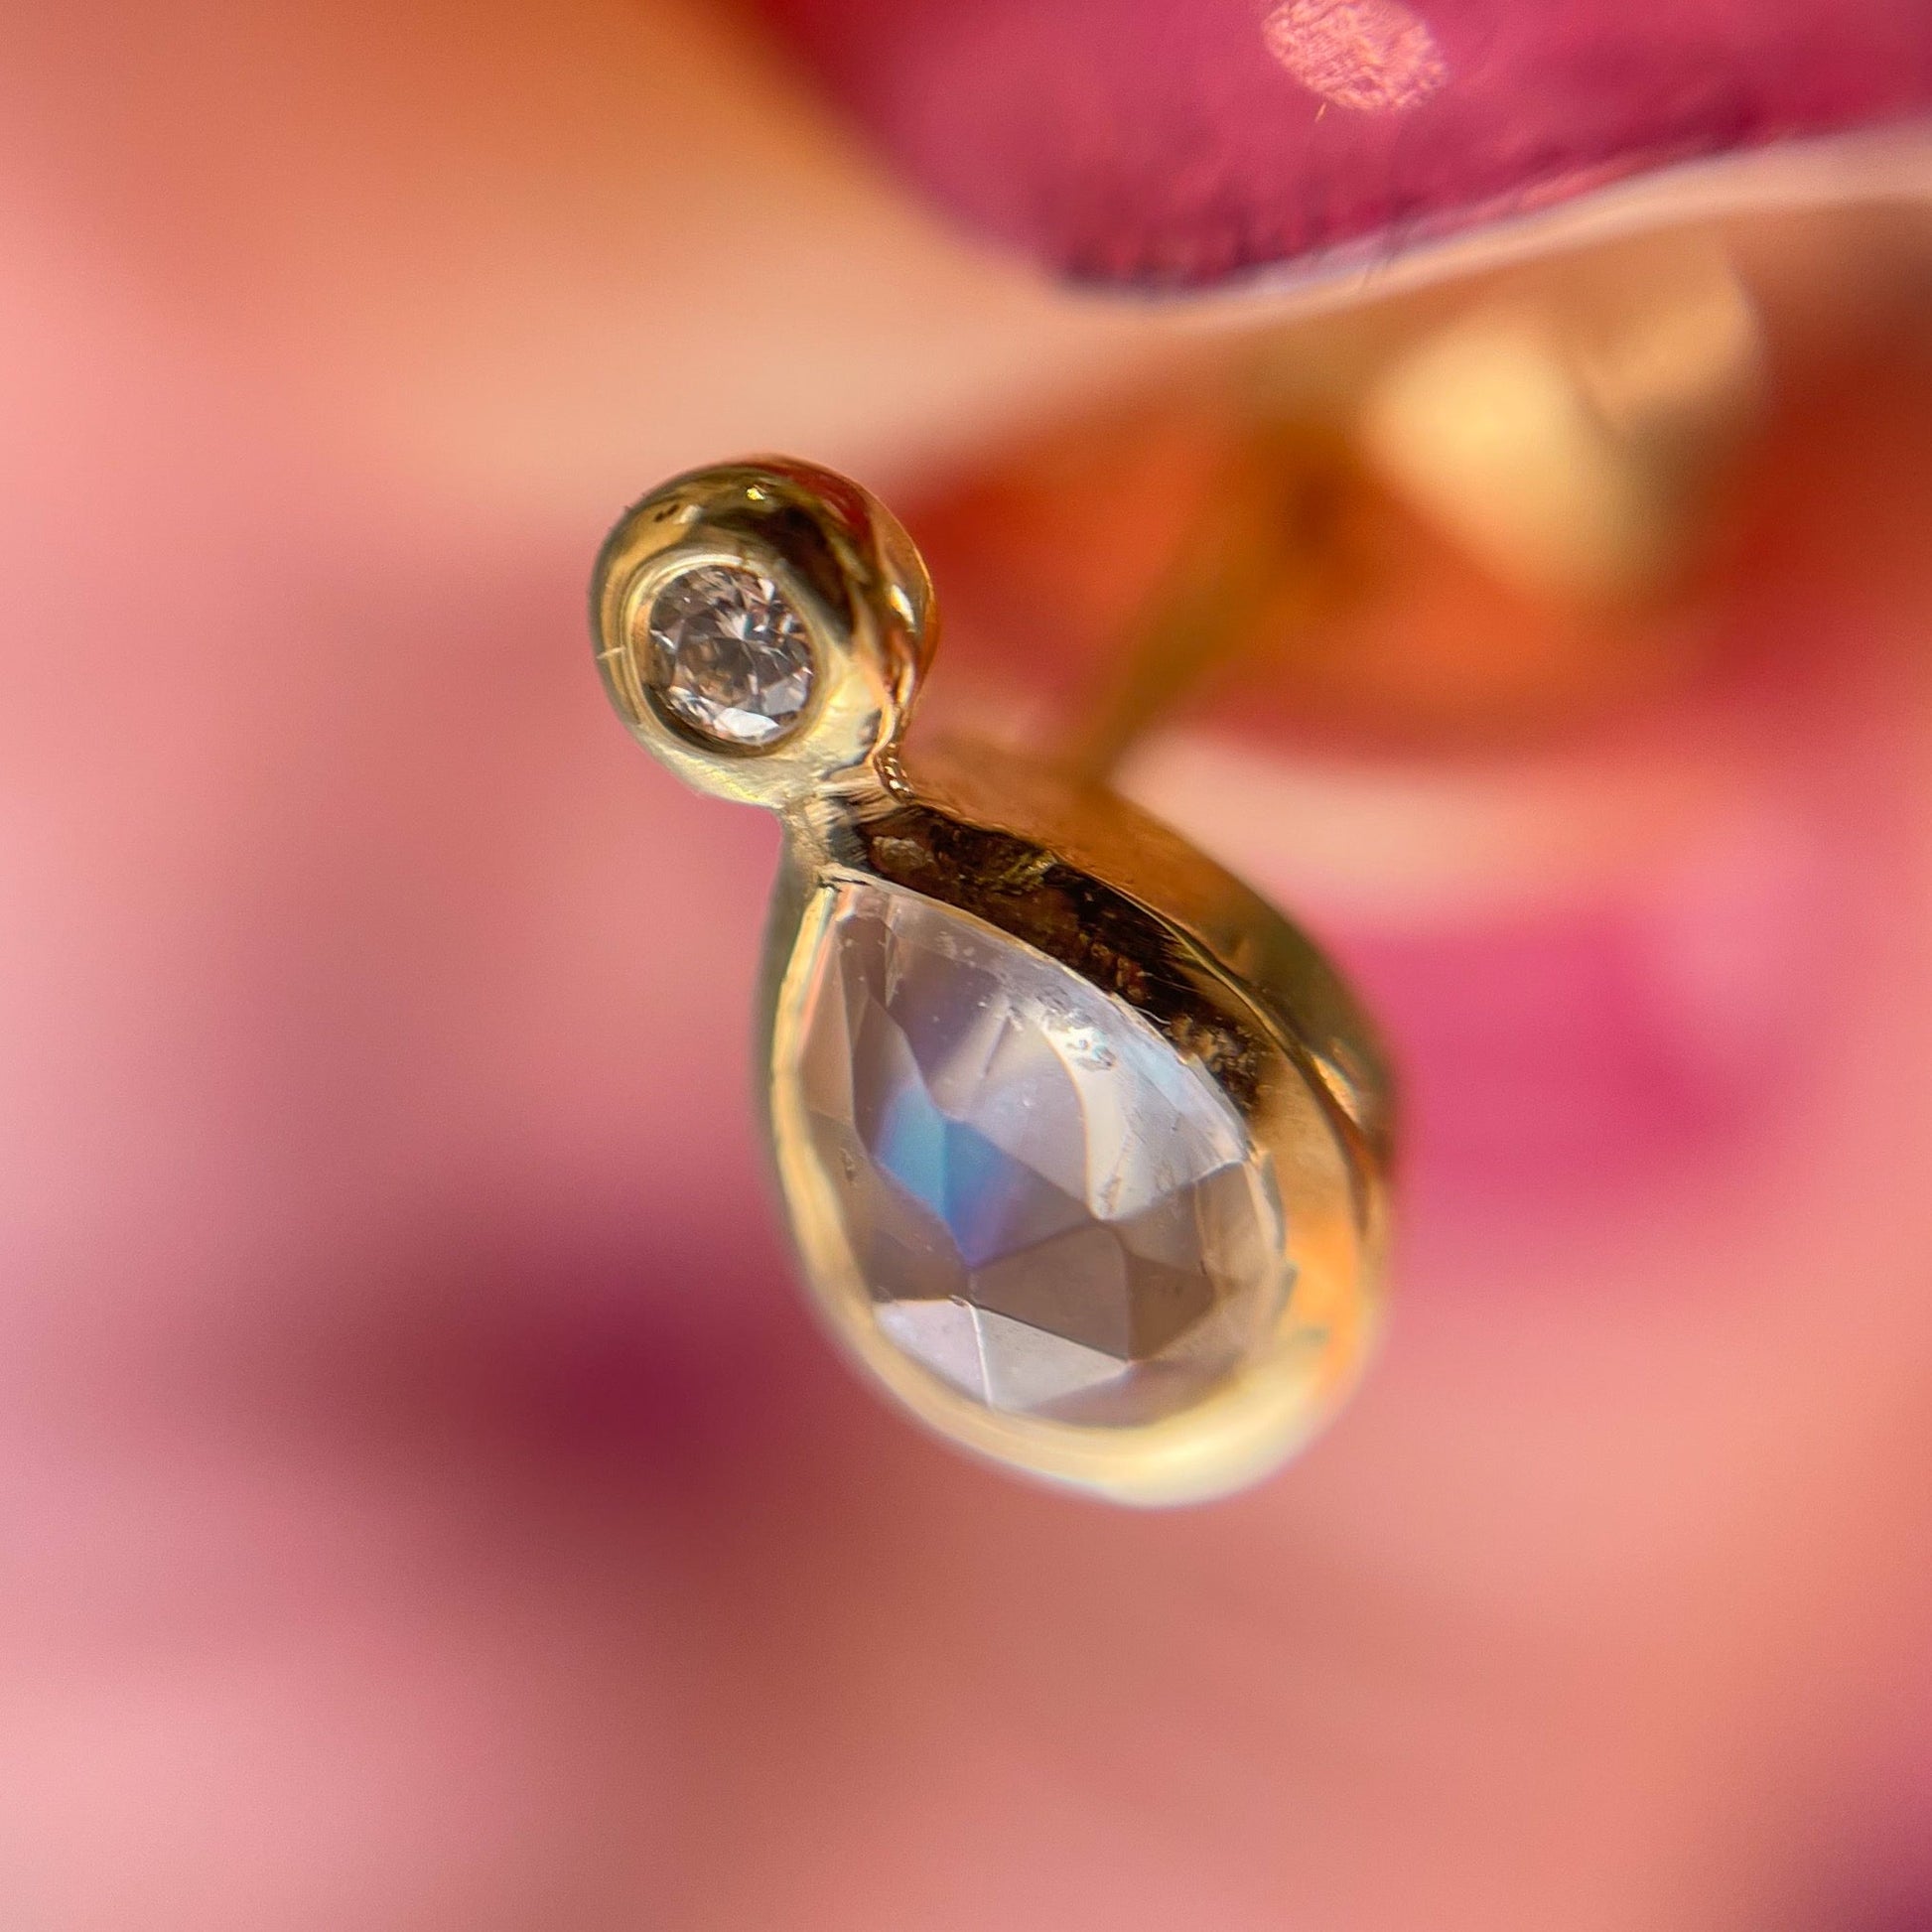 Moonstone Earrings by NIXIN Jewelry shown under magnification. One stud earring is shot at an angle, displaying the rose cut moonstone and small diamond.